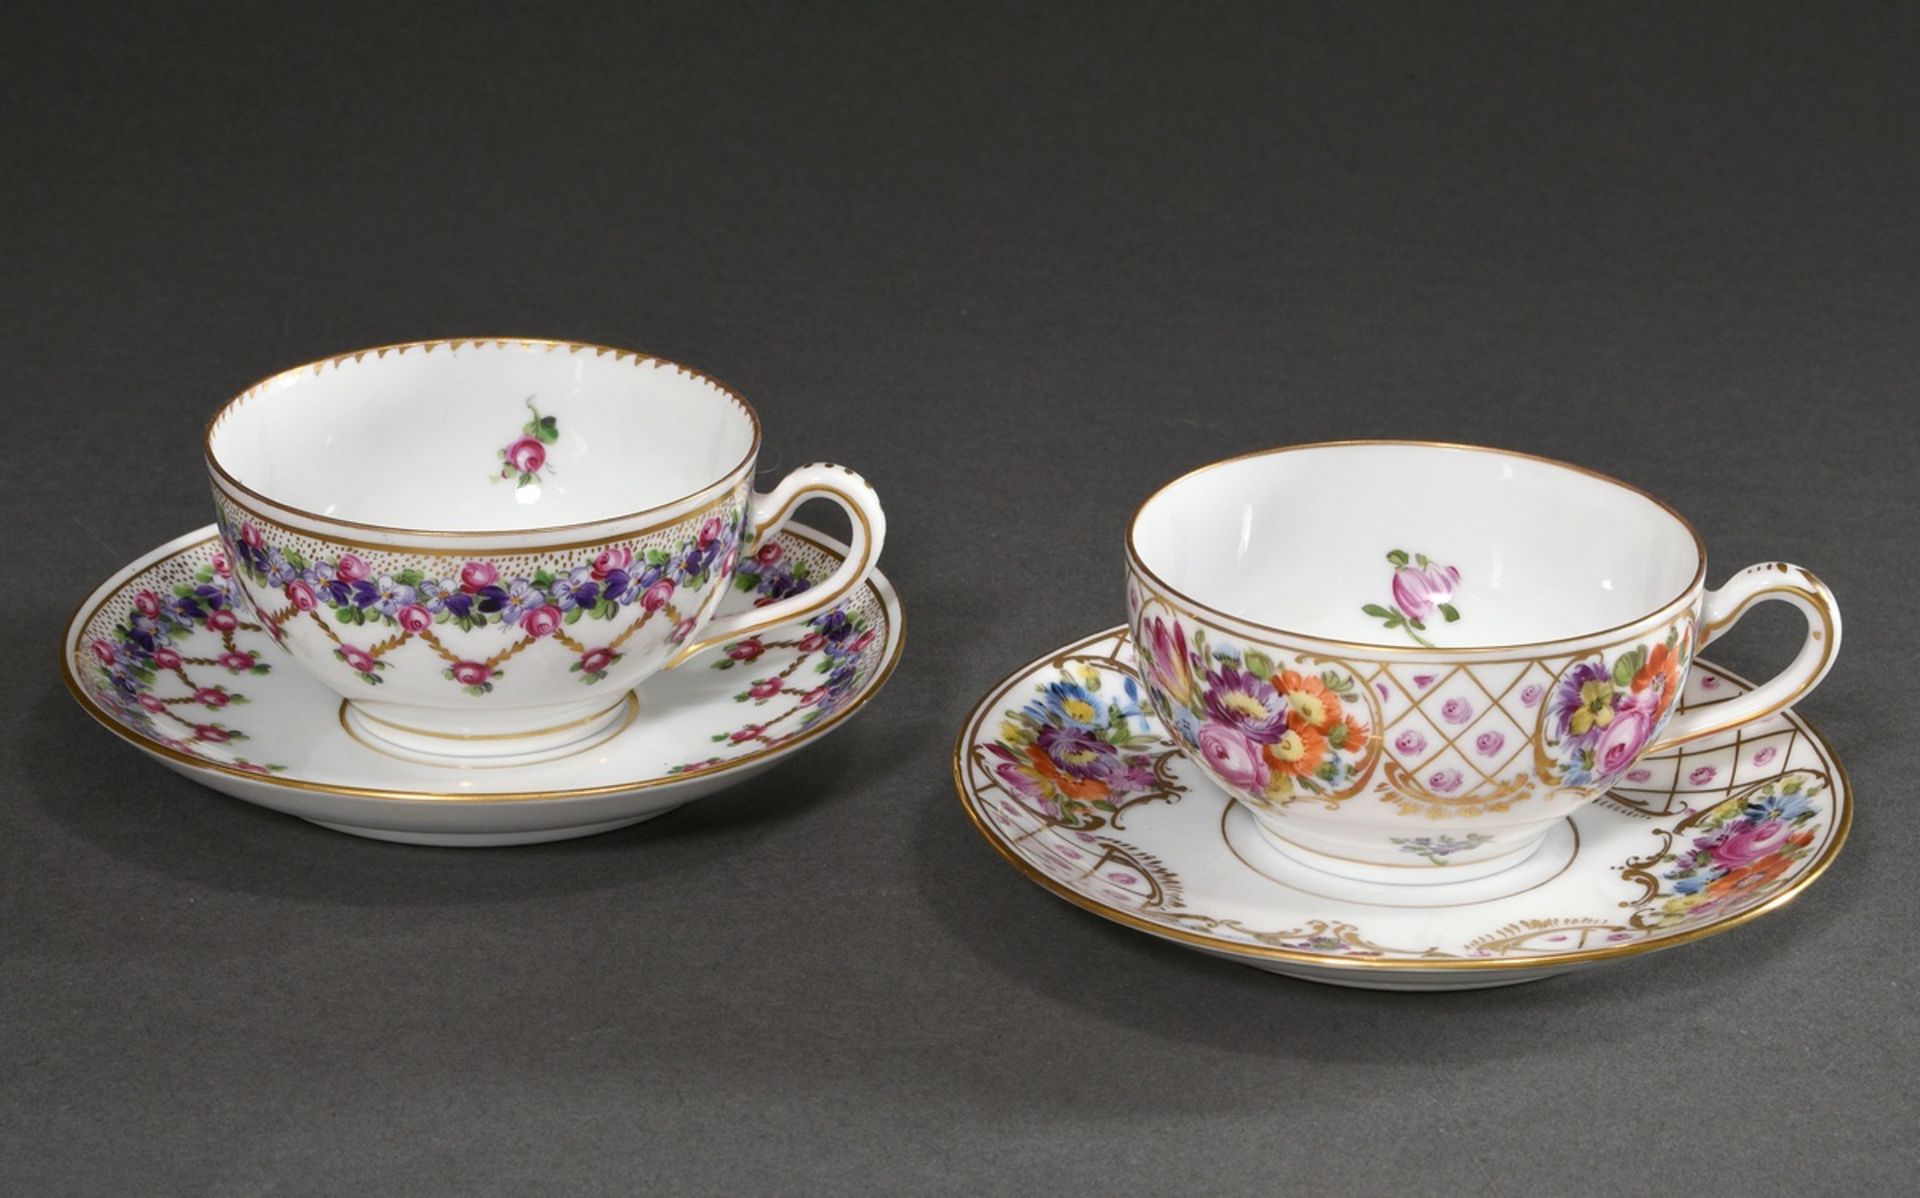 2 Various Dresden tea cups/saucer with polychrome floral painting and gold decoration, Donath & Co. - Image 2 of 4